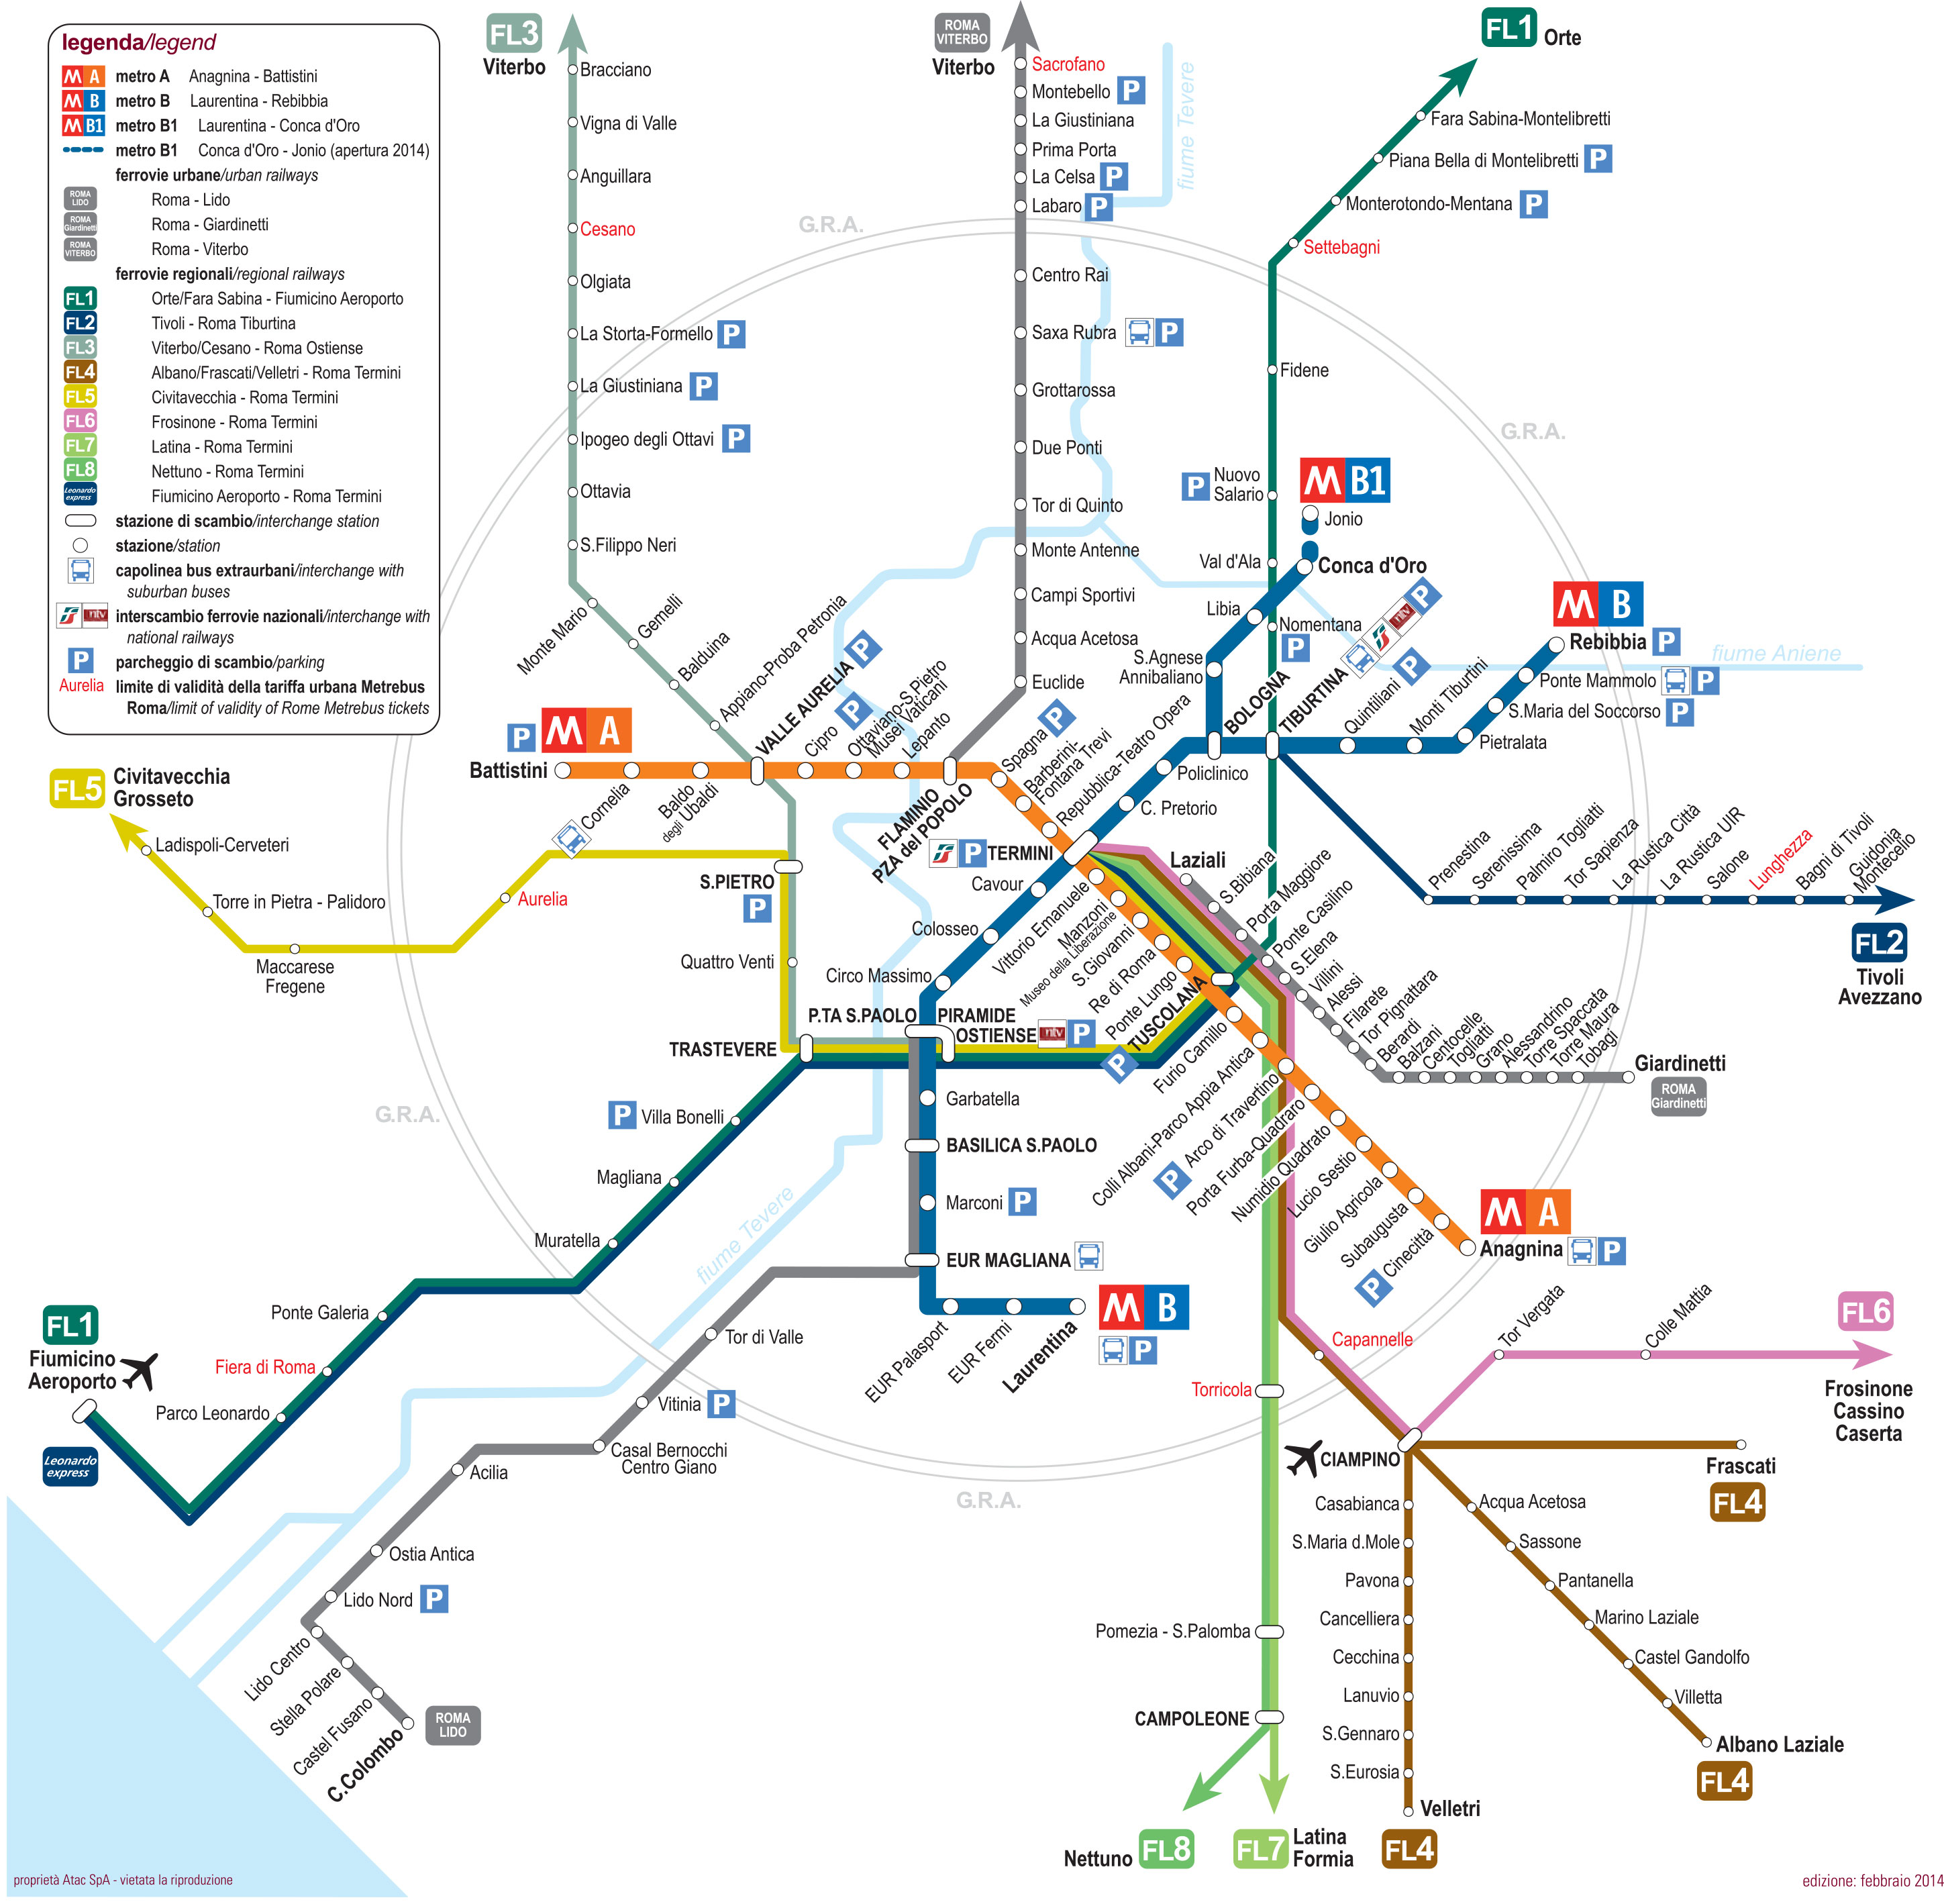 termini station rome map Map Of Rome Commuter Rail Stations Lines termini station rome map